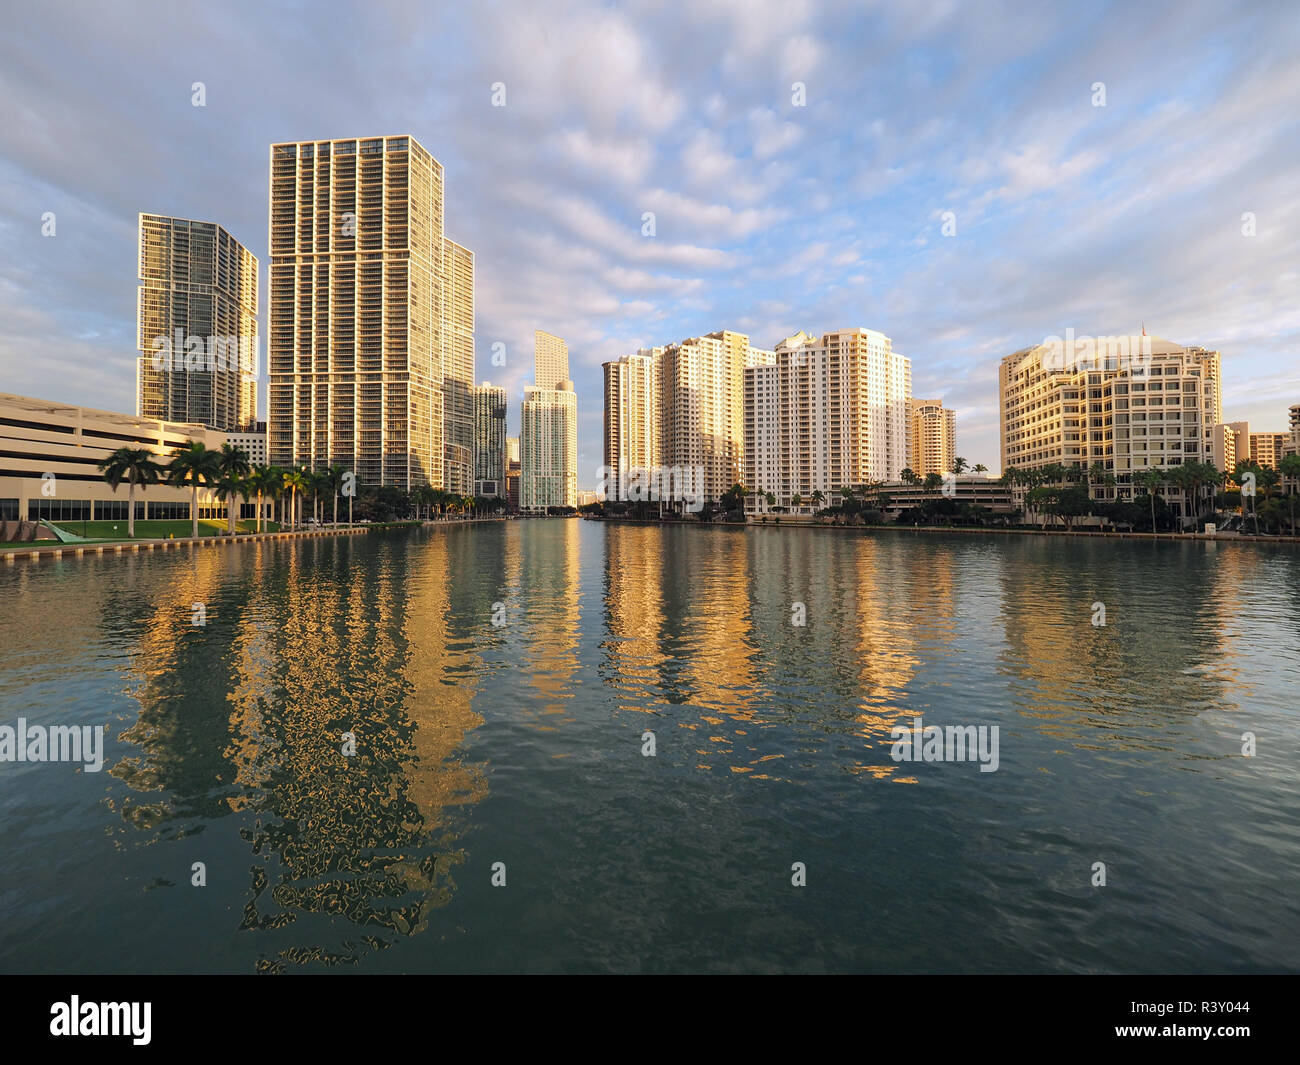 Miami, Florida 11-24-2018 Buildings of the City of Miami and Brickell Key, Florida, in early morning light. Stock Photo